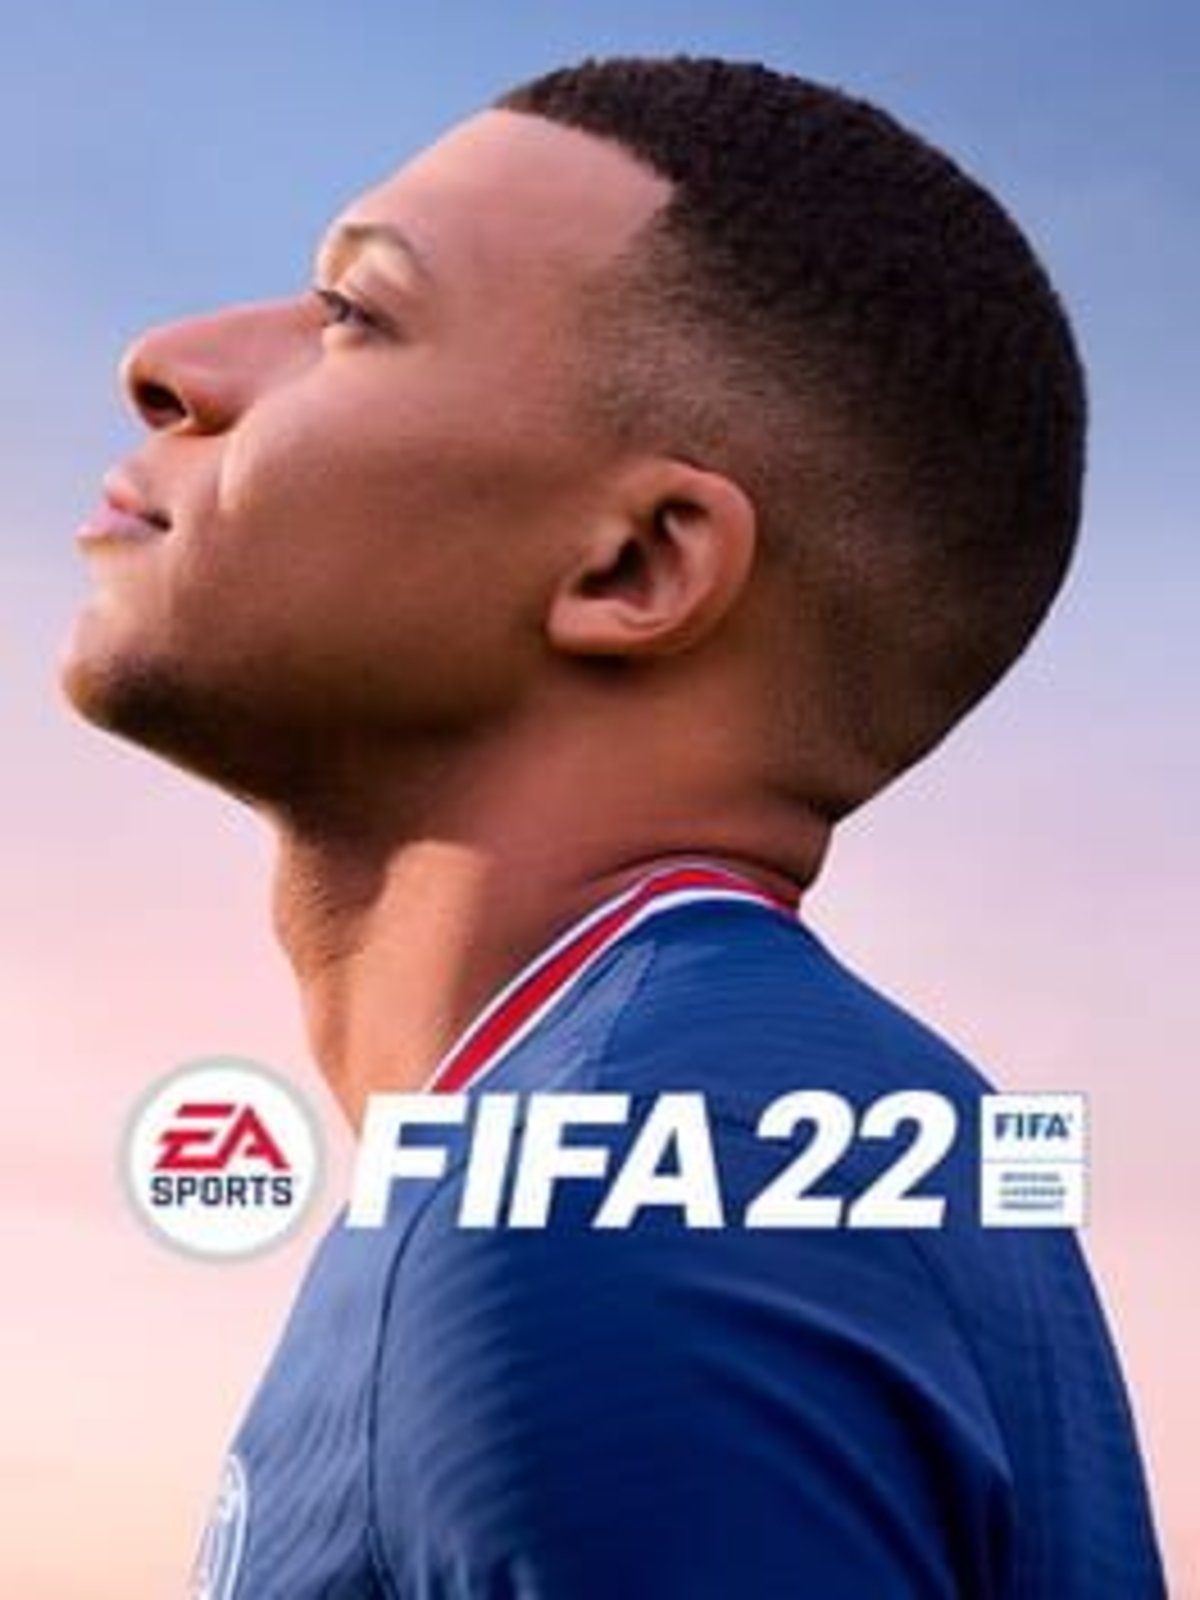 The update to the next generation of FIFA 22 can only be done through the Ultimate Edition